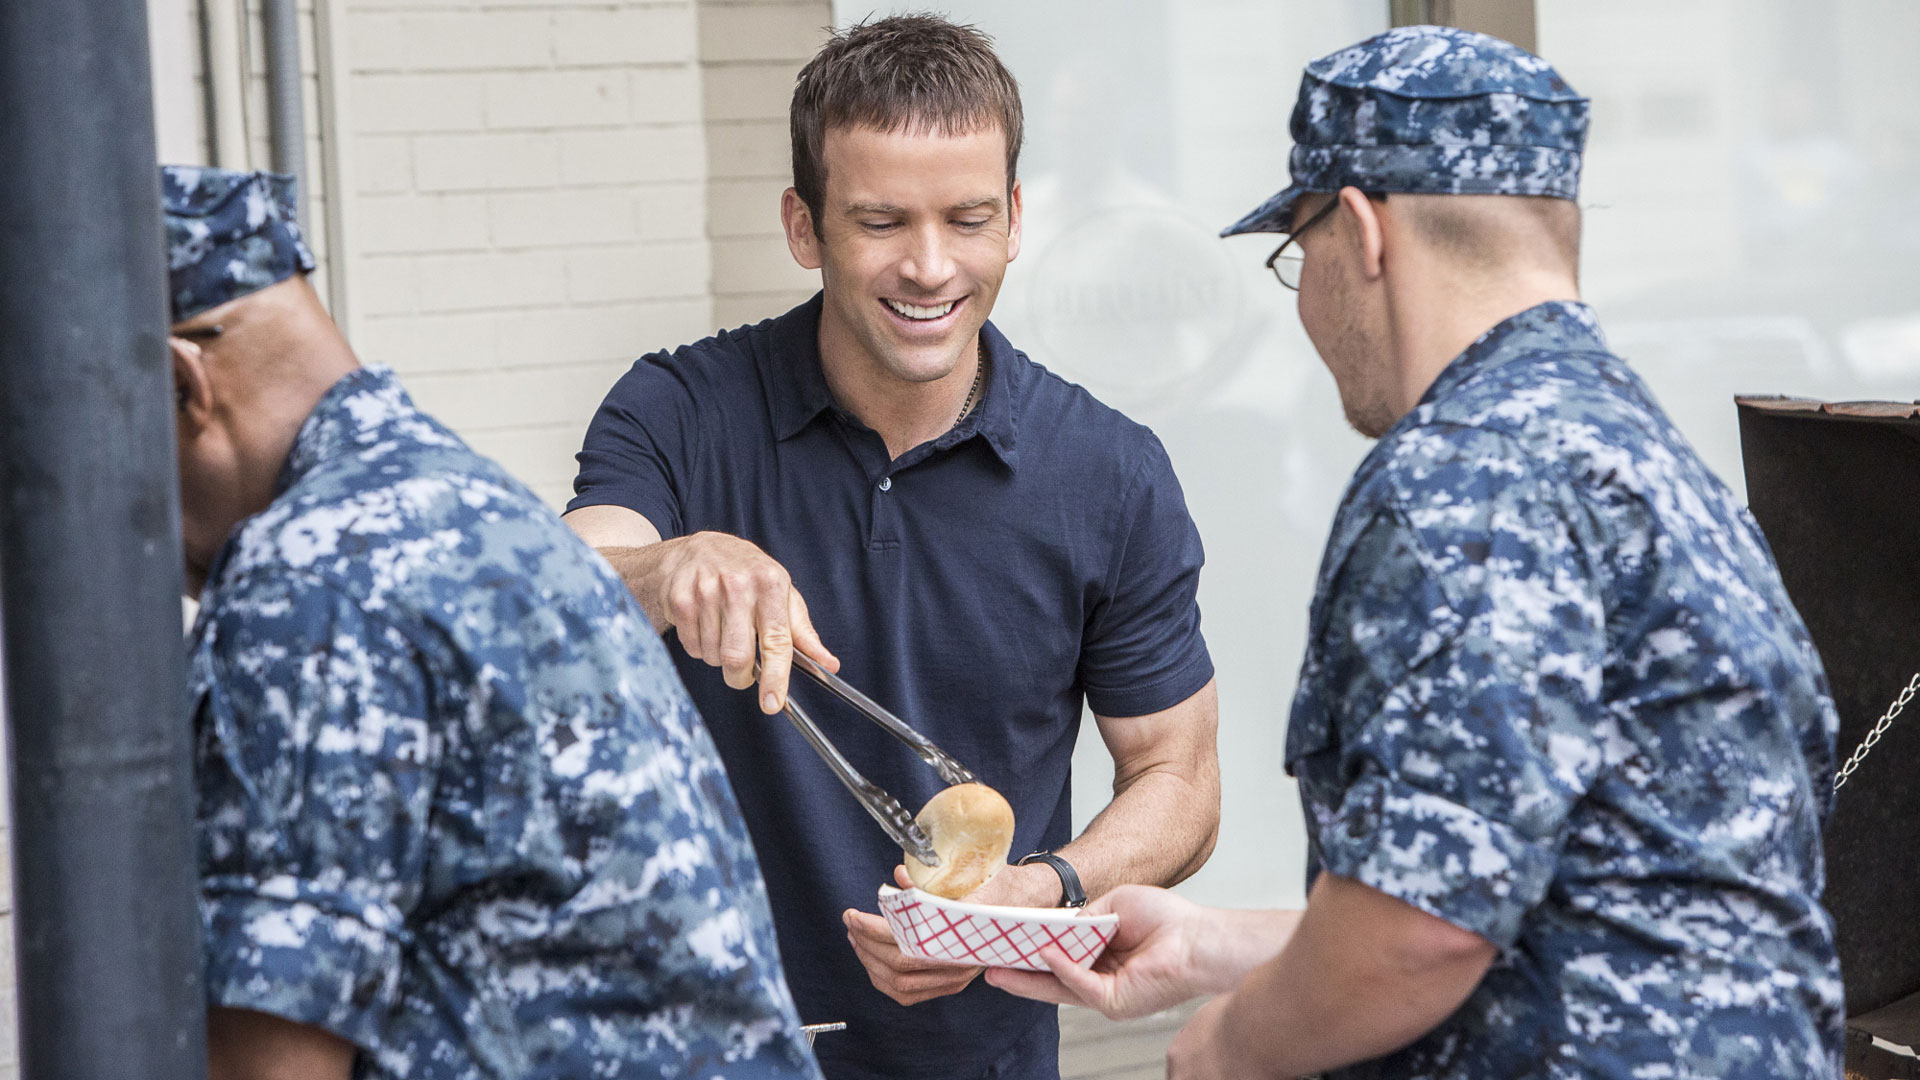 Lasalle serves food to military personnel.